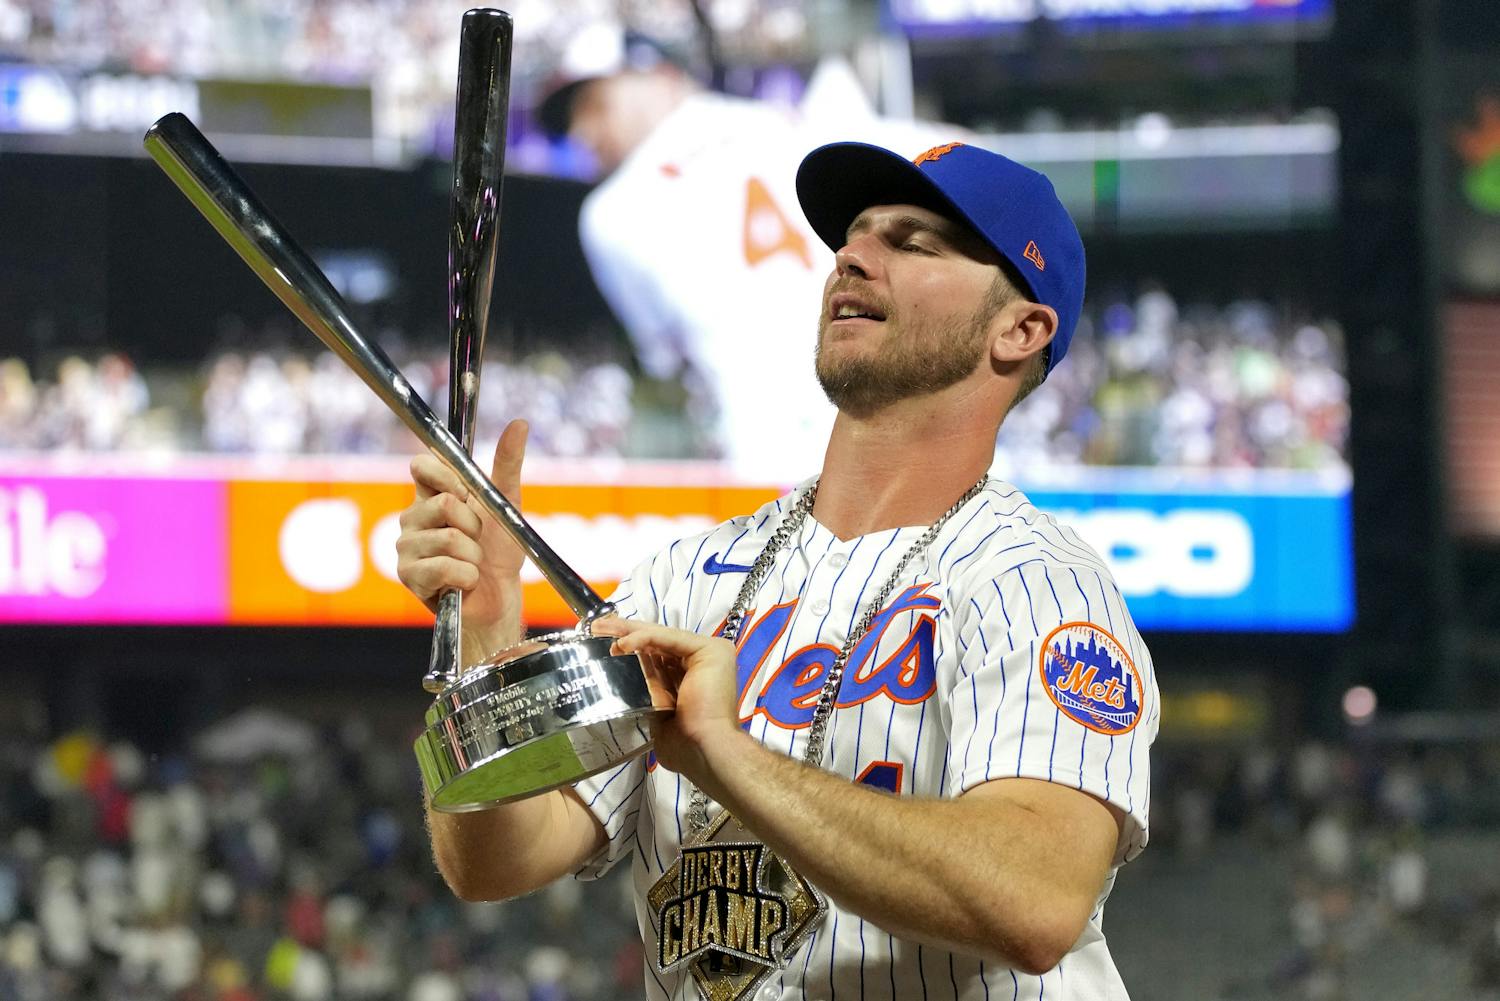 Pete Alonso holds the champions trophy after winning the MLB All Star baseball Home Run Derby, Monday, July 12, 2021, in Denver. (AP Photo/David Zalubowski)